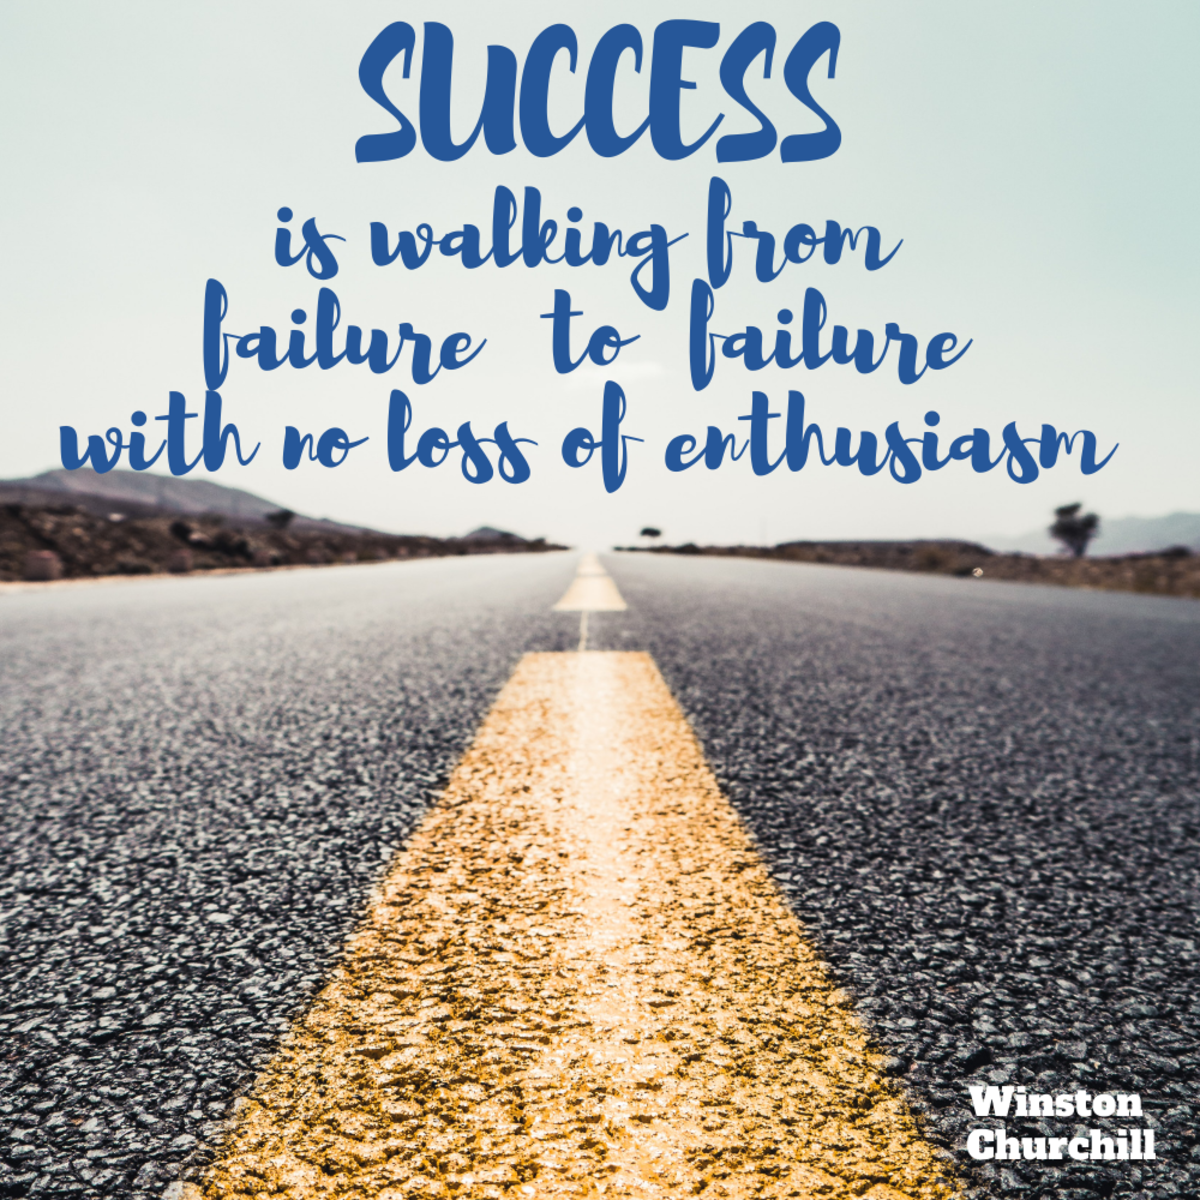 "Success is walking from failure to failure with no loss of enthusiasm.” (Winston Churchill)